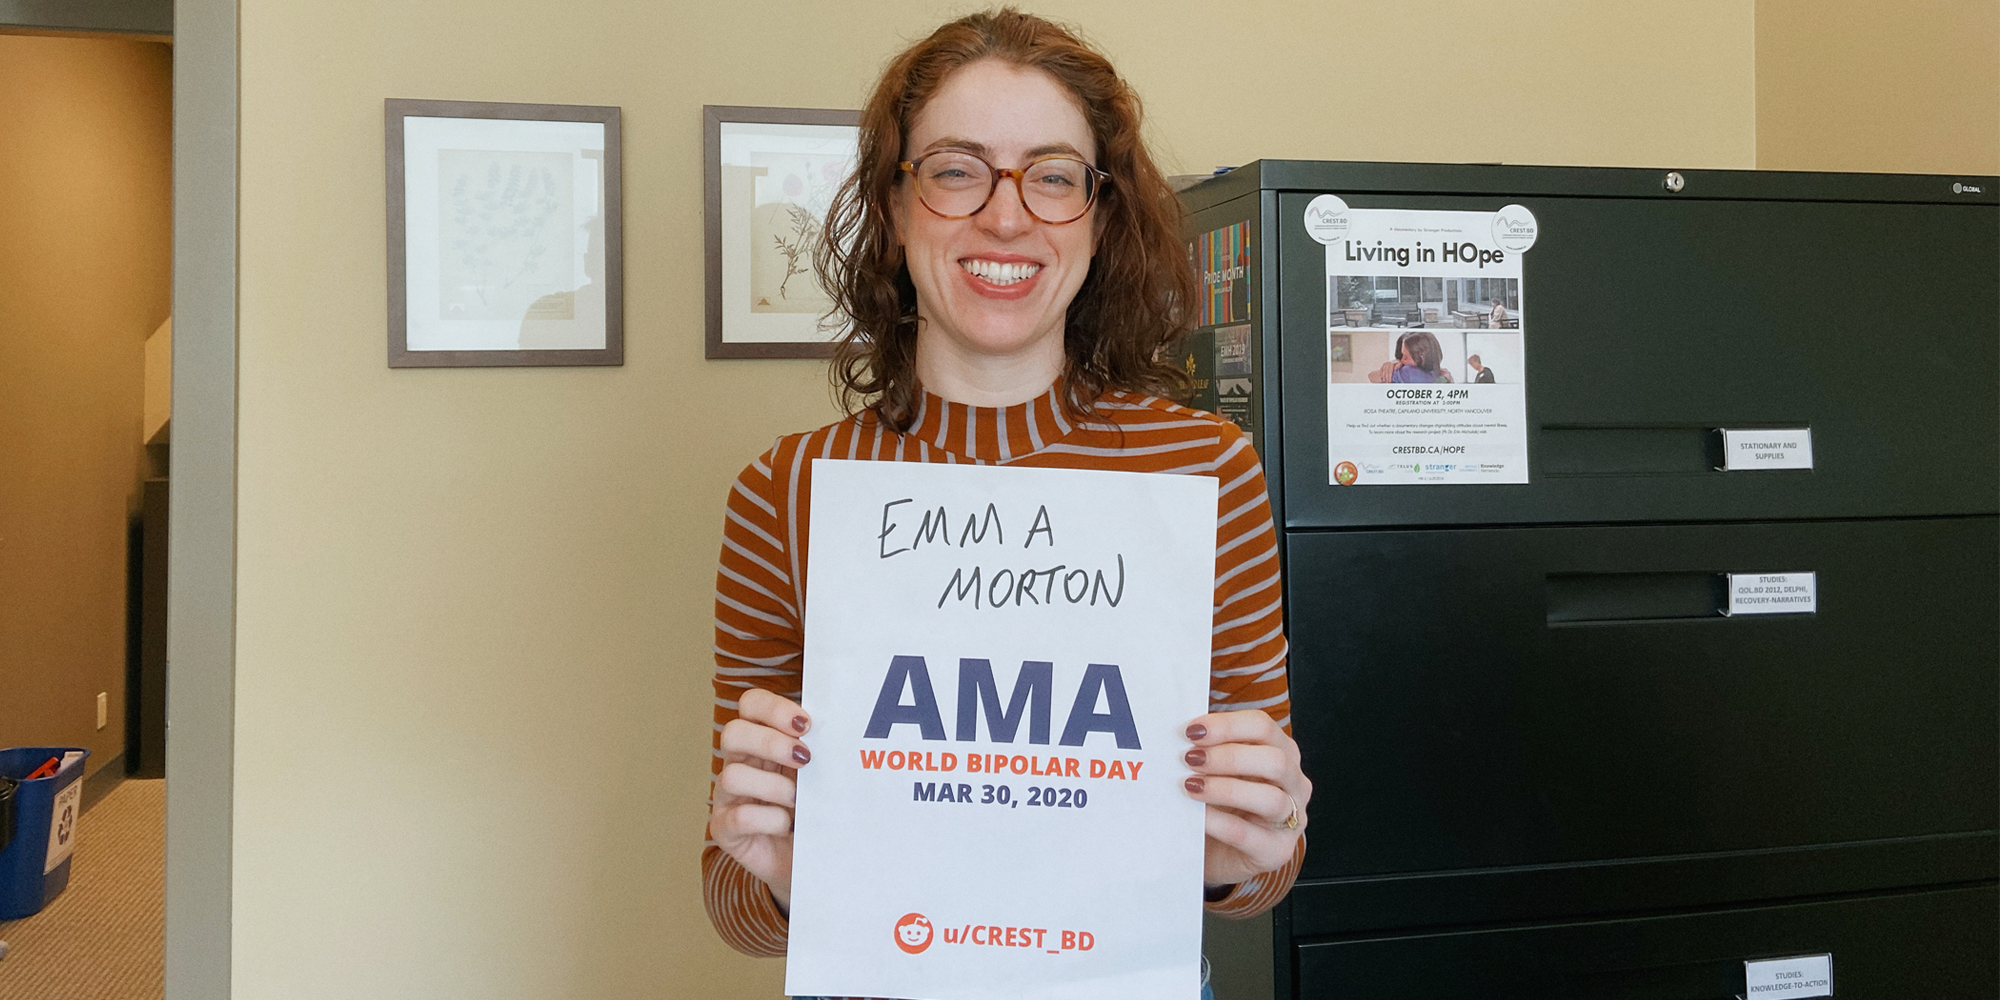 Emma in her office, smiling and holding a sign proving she will be involved in the bipolar ama.